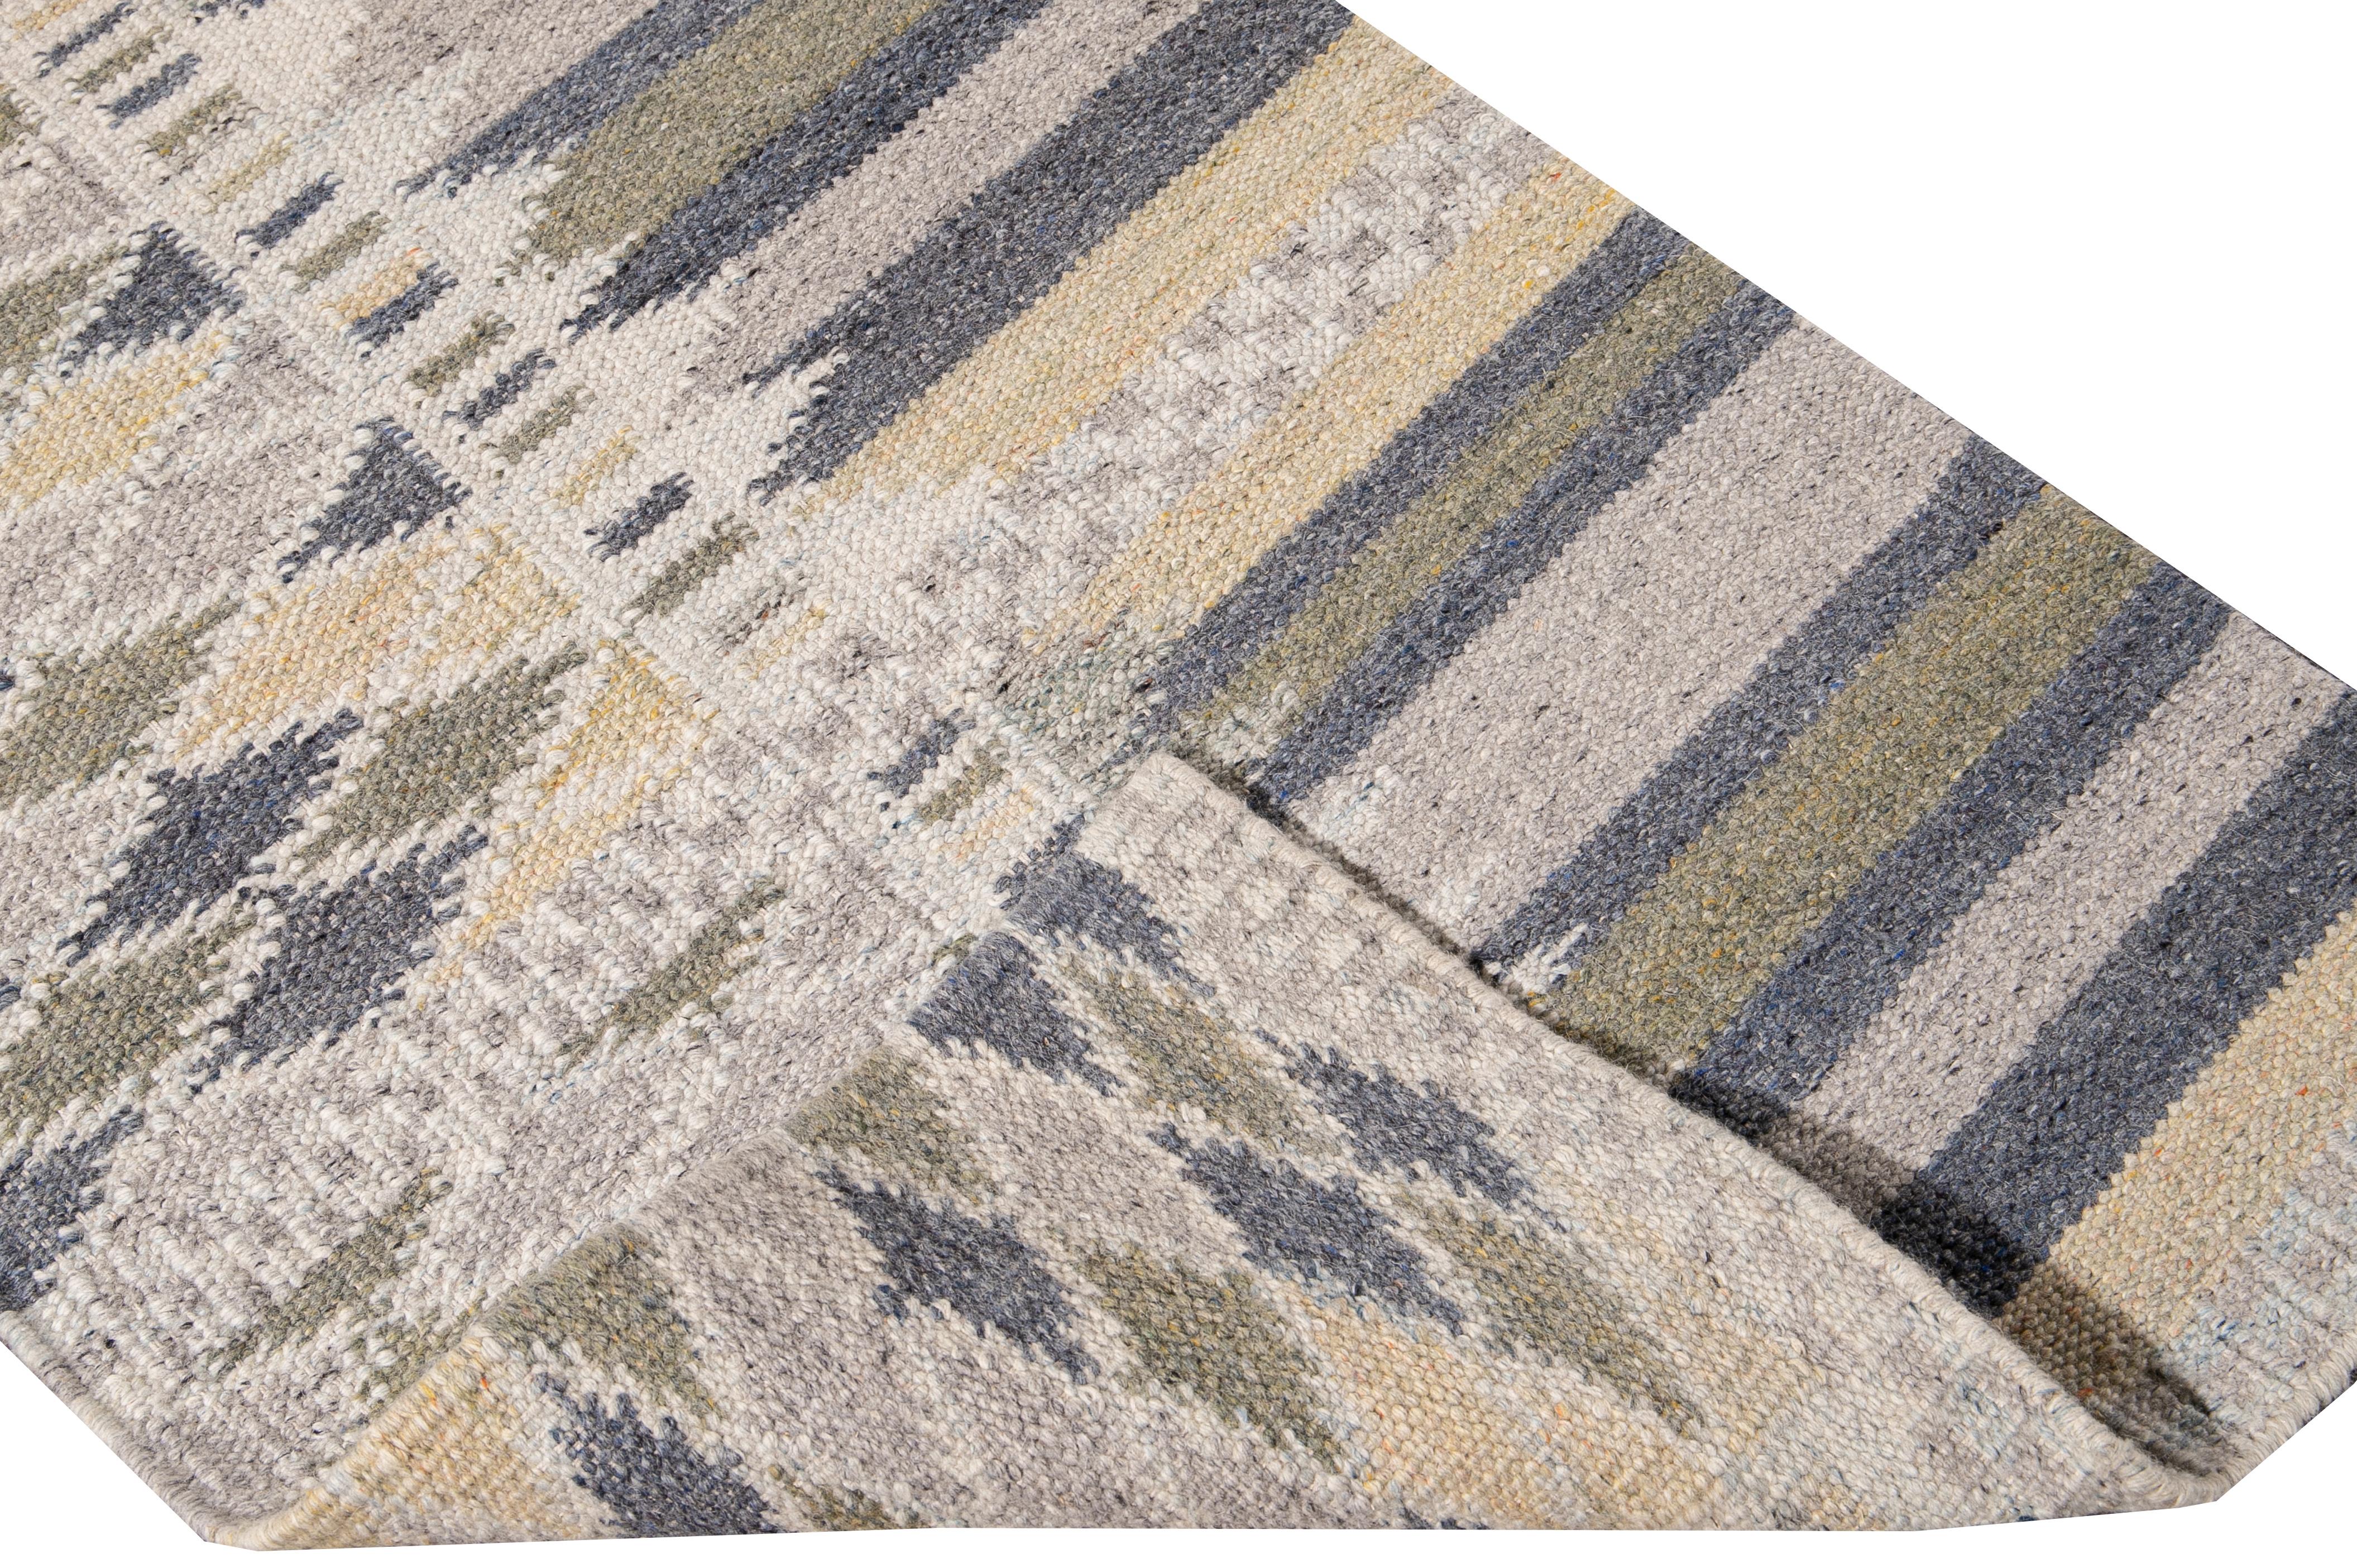 Beautiful modern Long Swedish hand-knotted wool runner with a beige field. This Swedish runner has accents of blue, green, and yellow in an all-over geometric abstract design.

This rug measures: 3'1